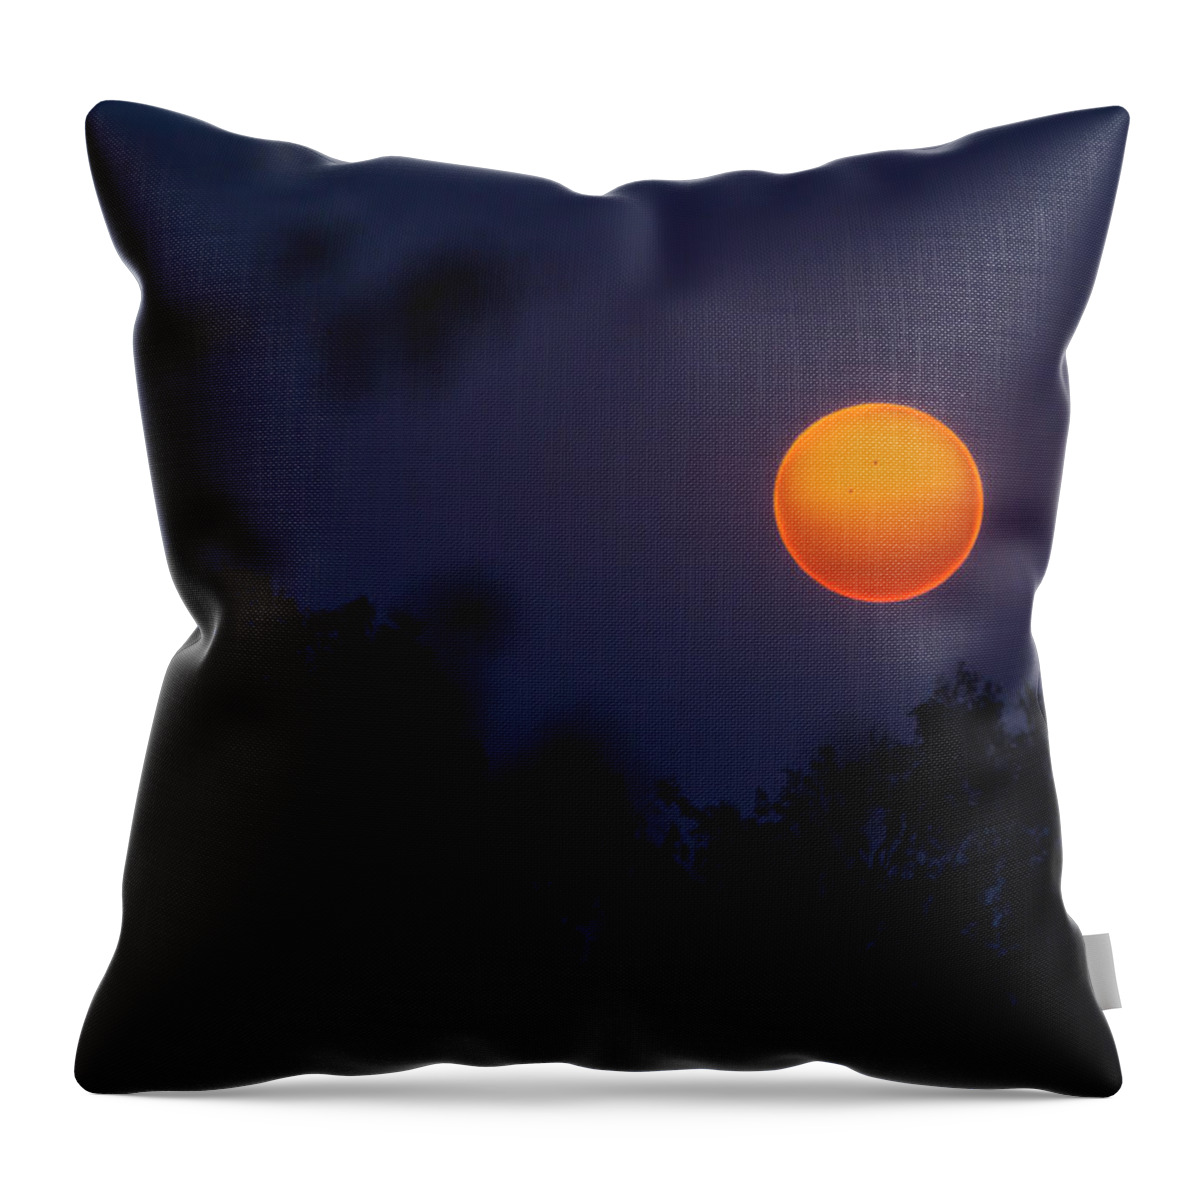 Morning Throw Pillow featuring the photograph Sunrise by SAURAVphoto Online Store